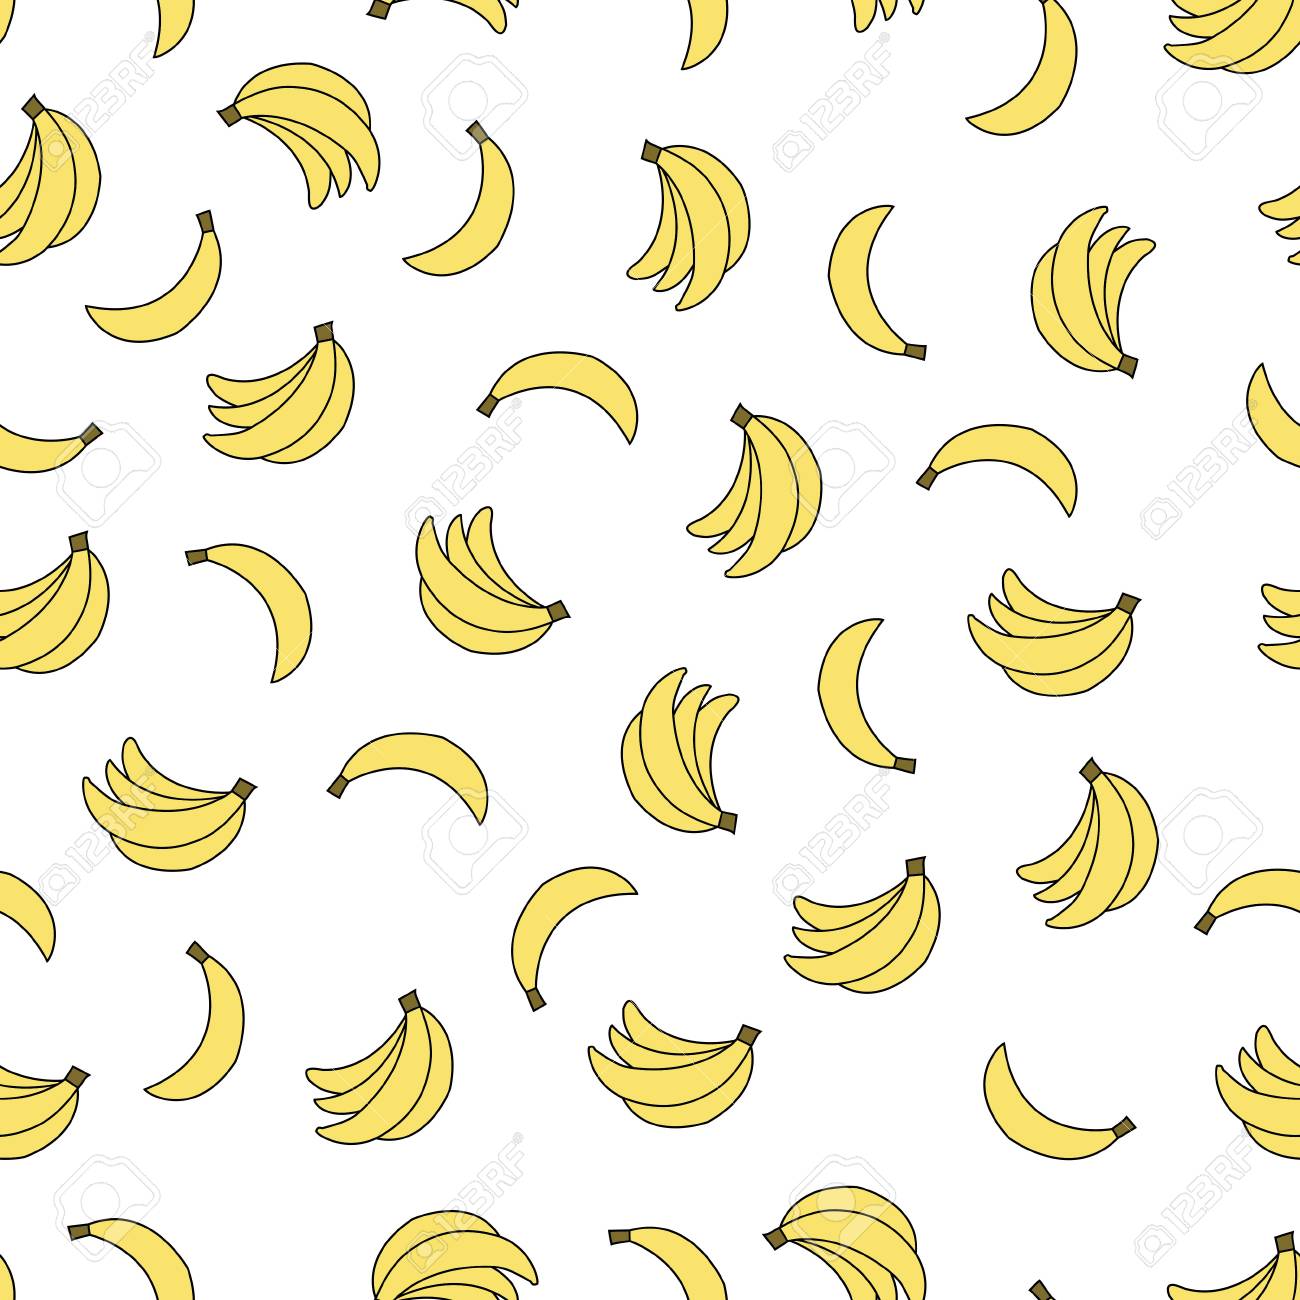 Seamless Pattern With Bananas On White Background Can Be Used